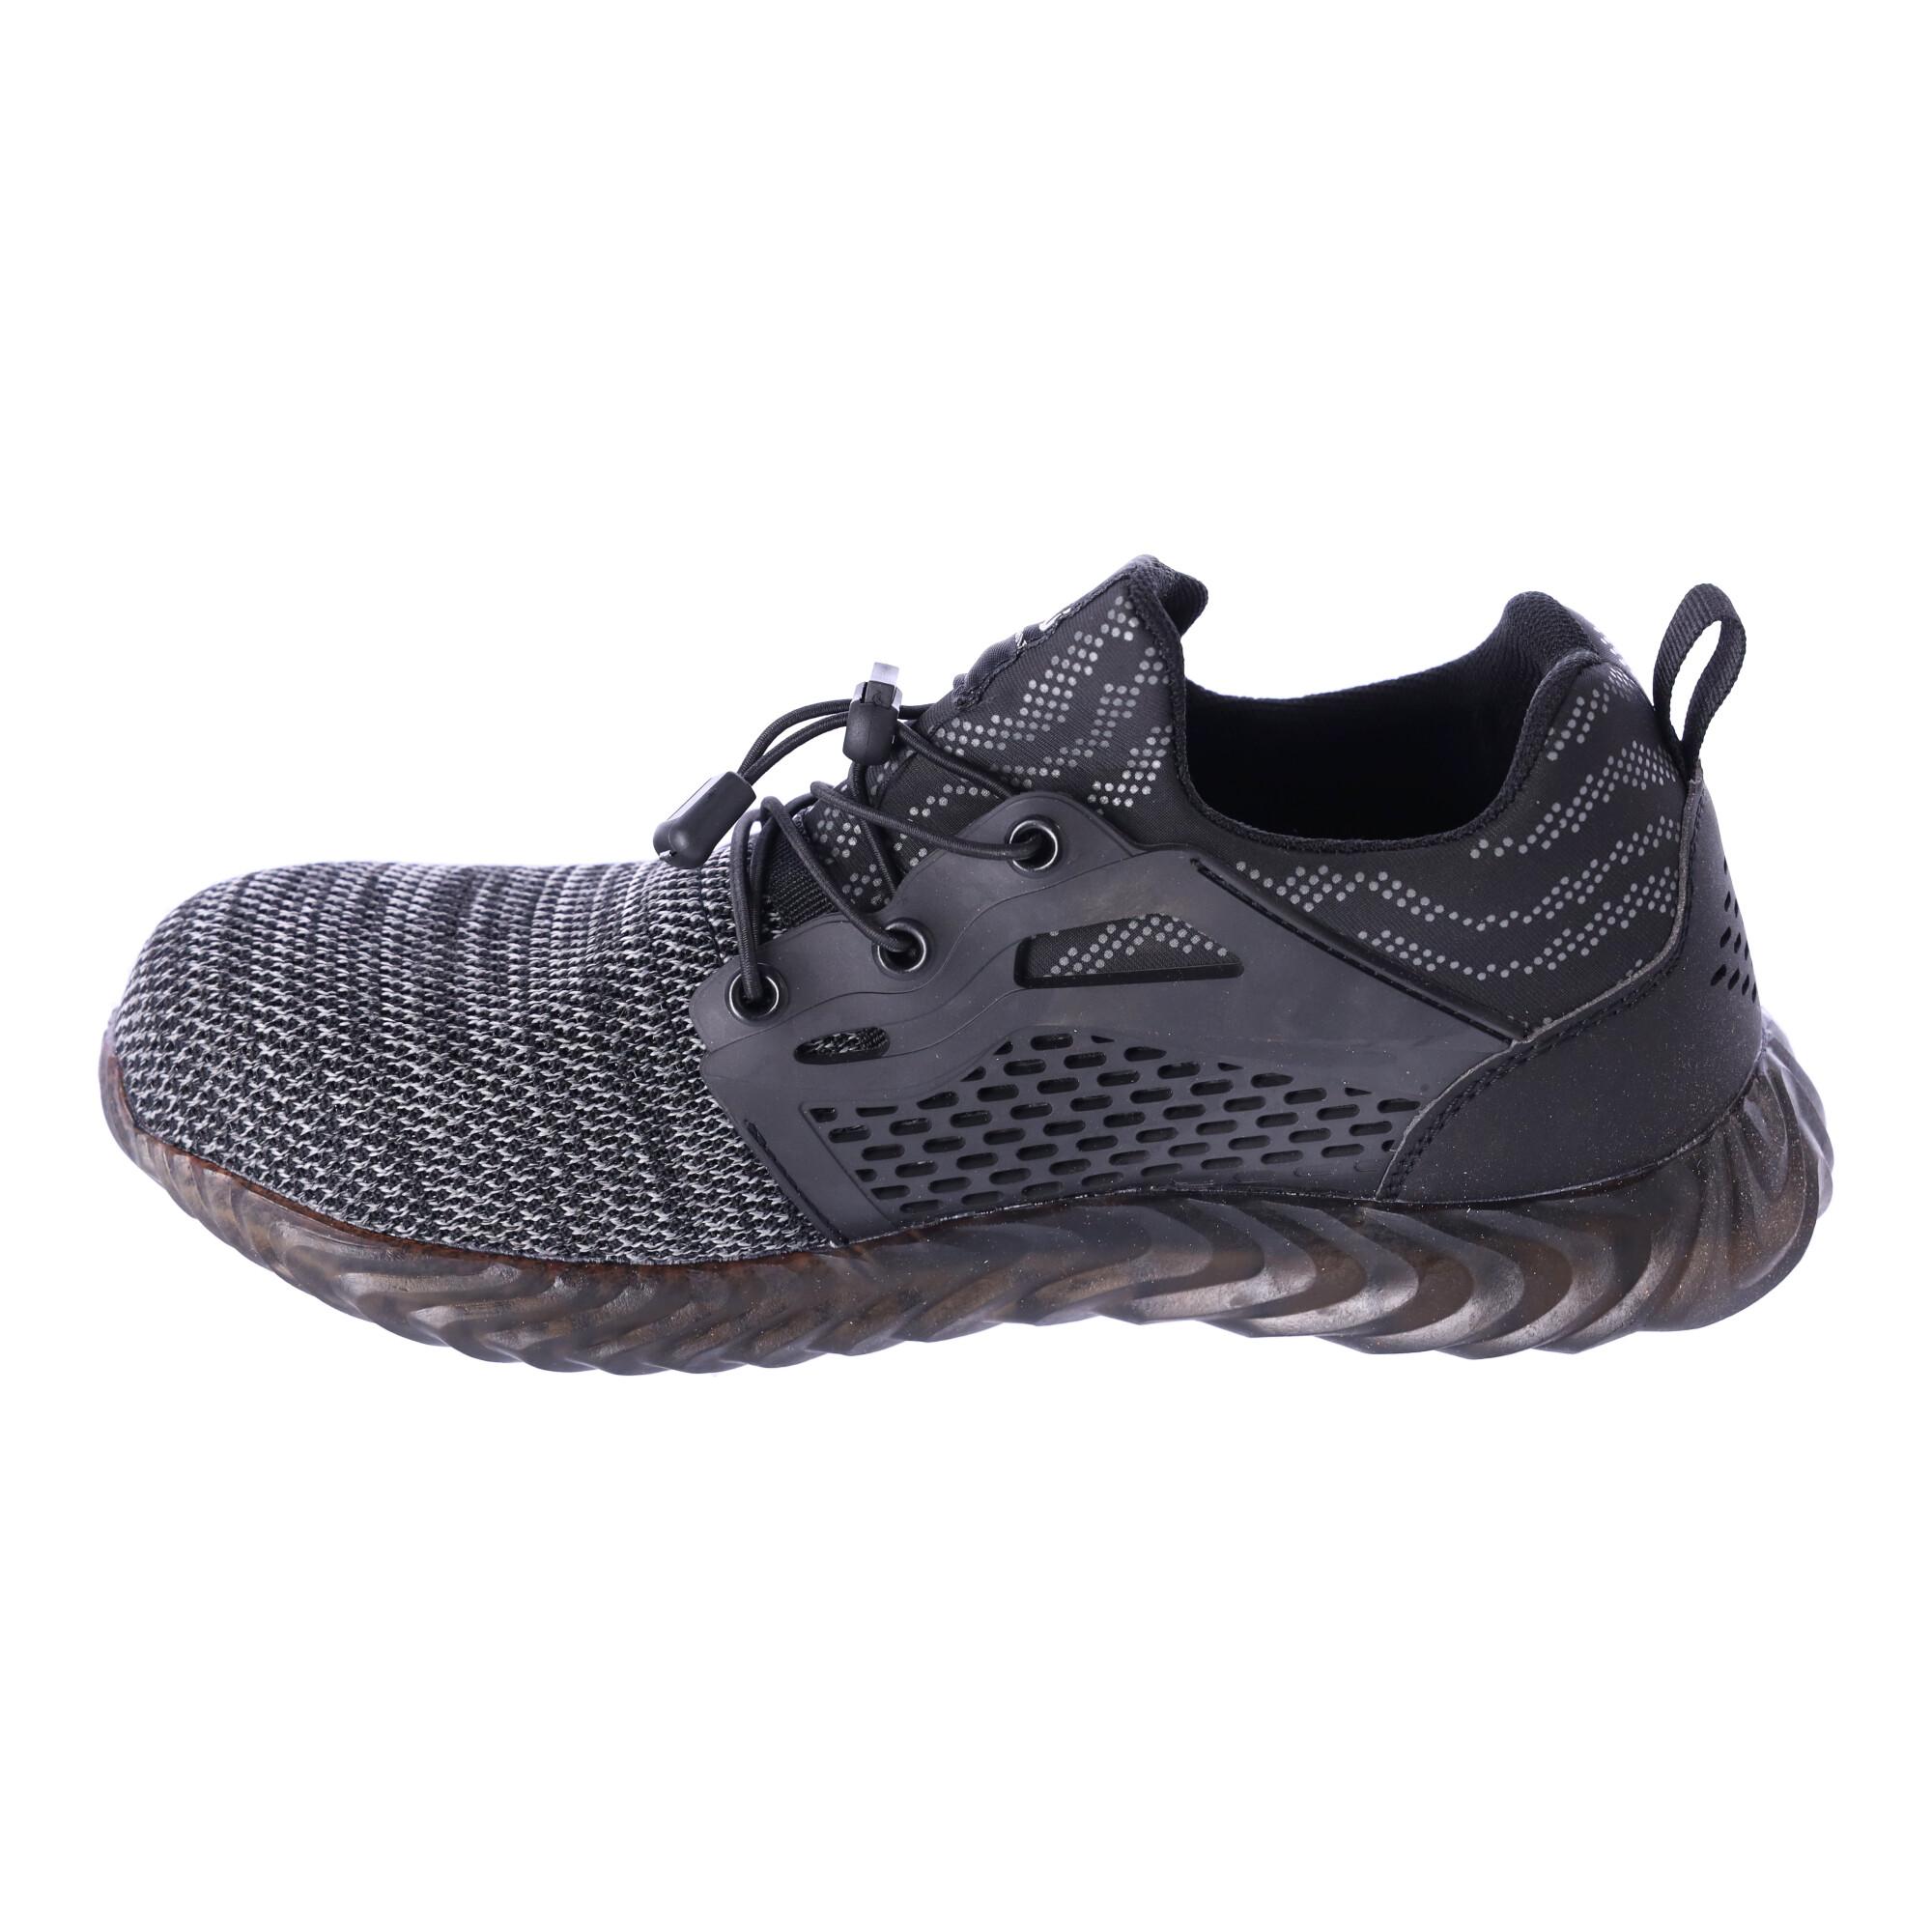 Work safety shoes "43" - gray